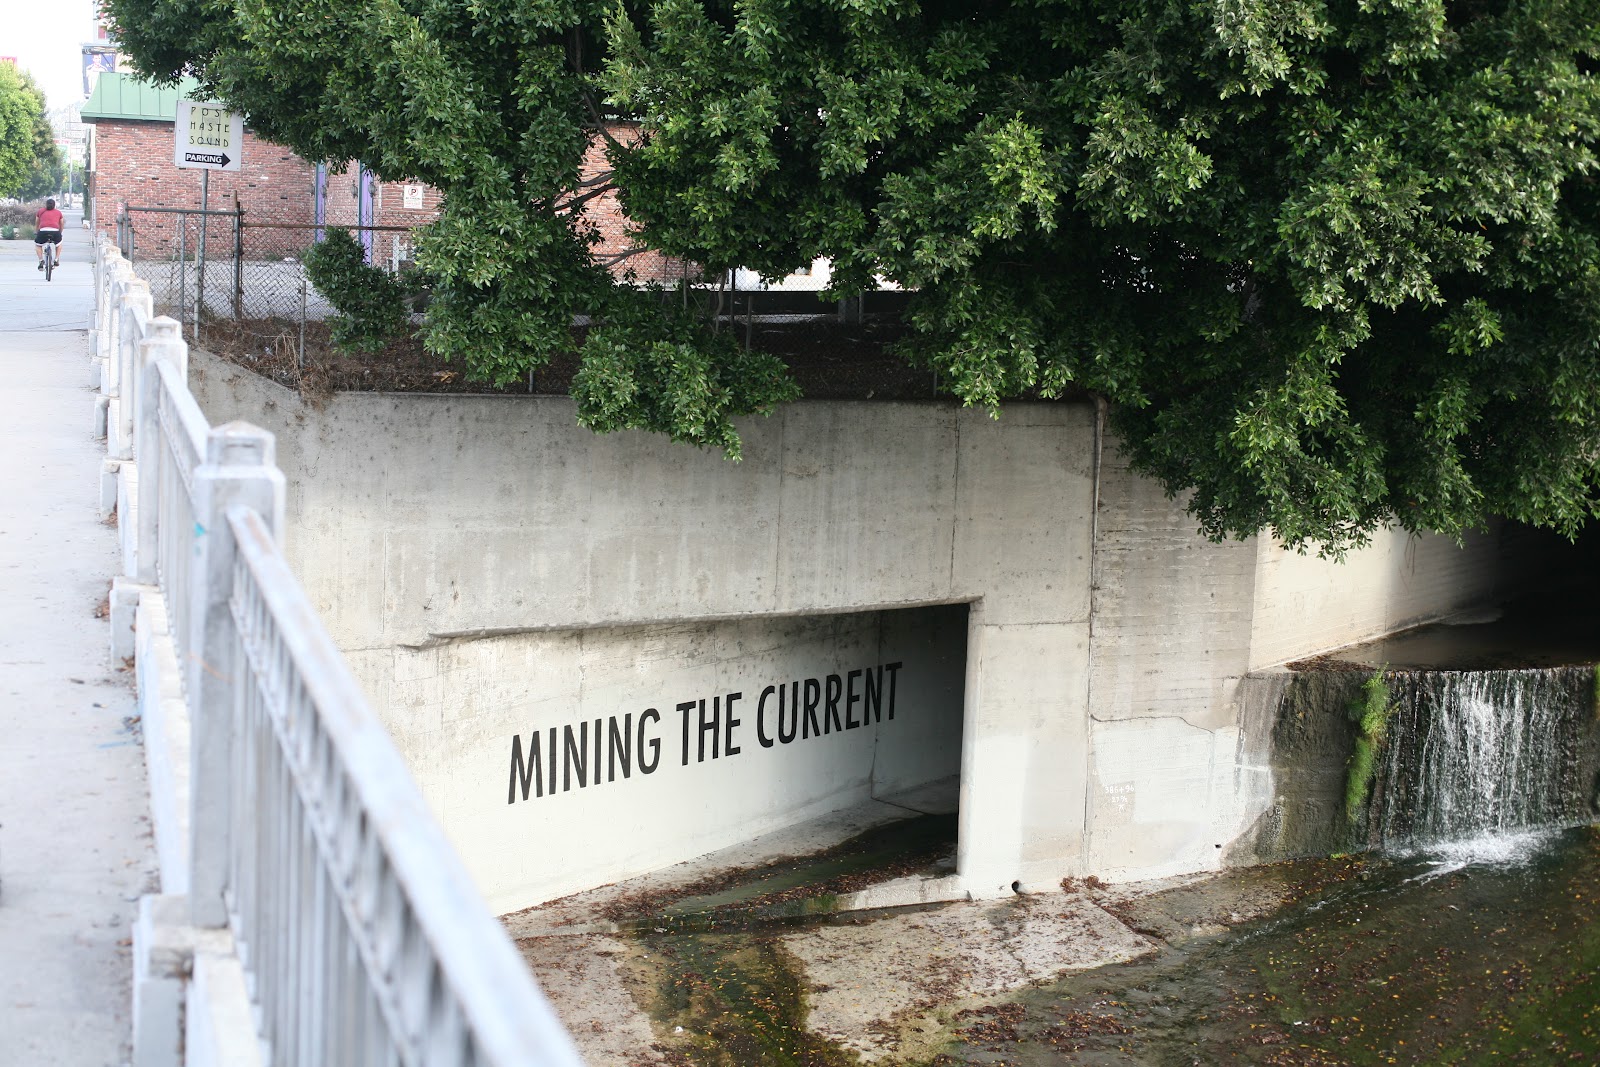   Mining The Current   Intervention, Los Angeles, CA  2012 